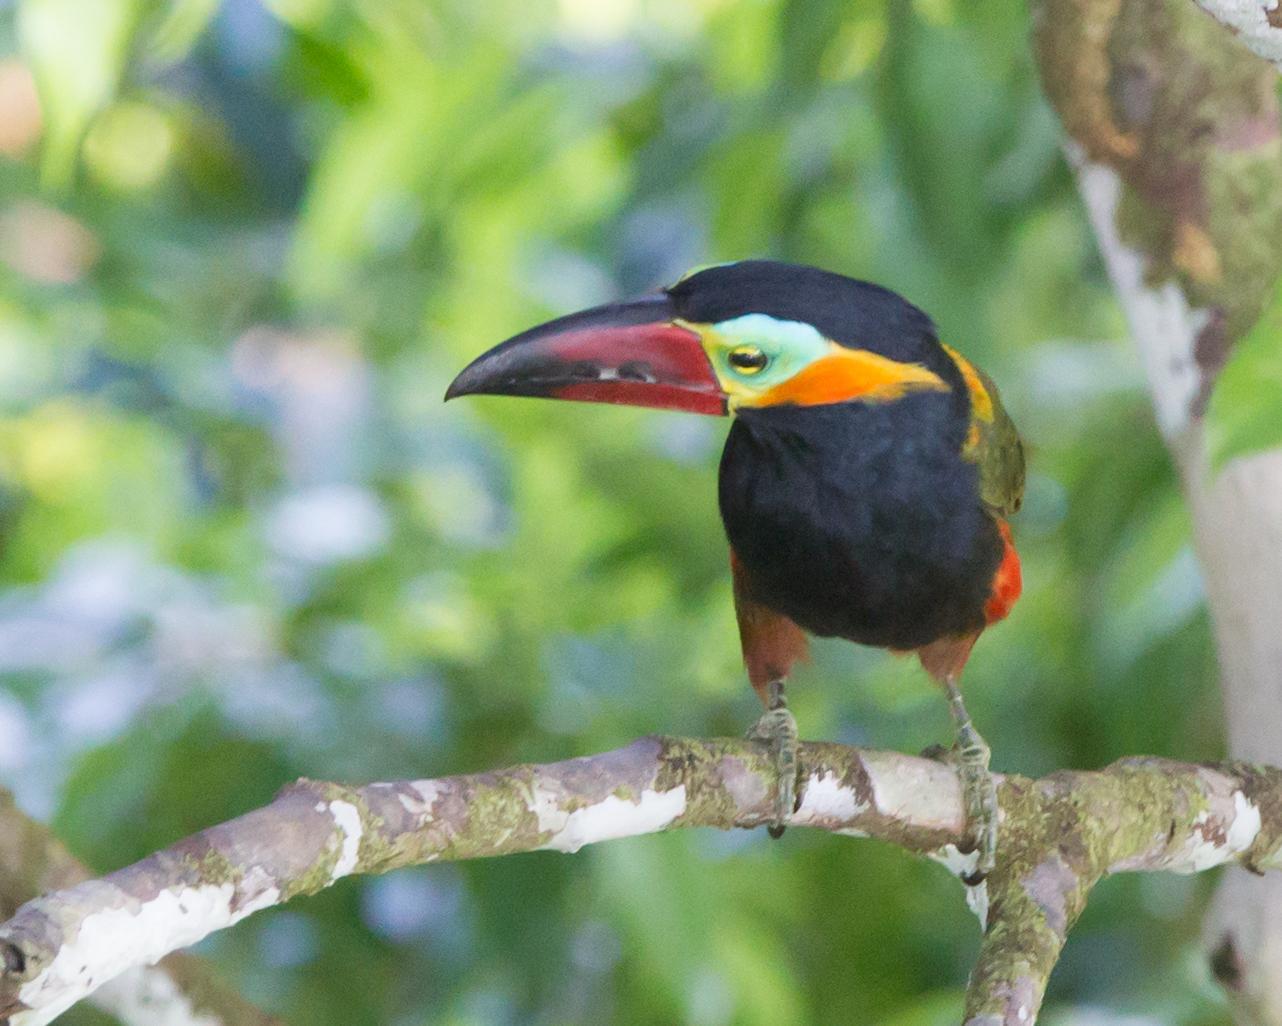 Golden-collared Toucanet Photo by Kevin Berkoff